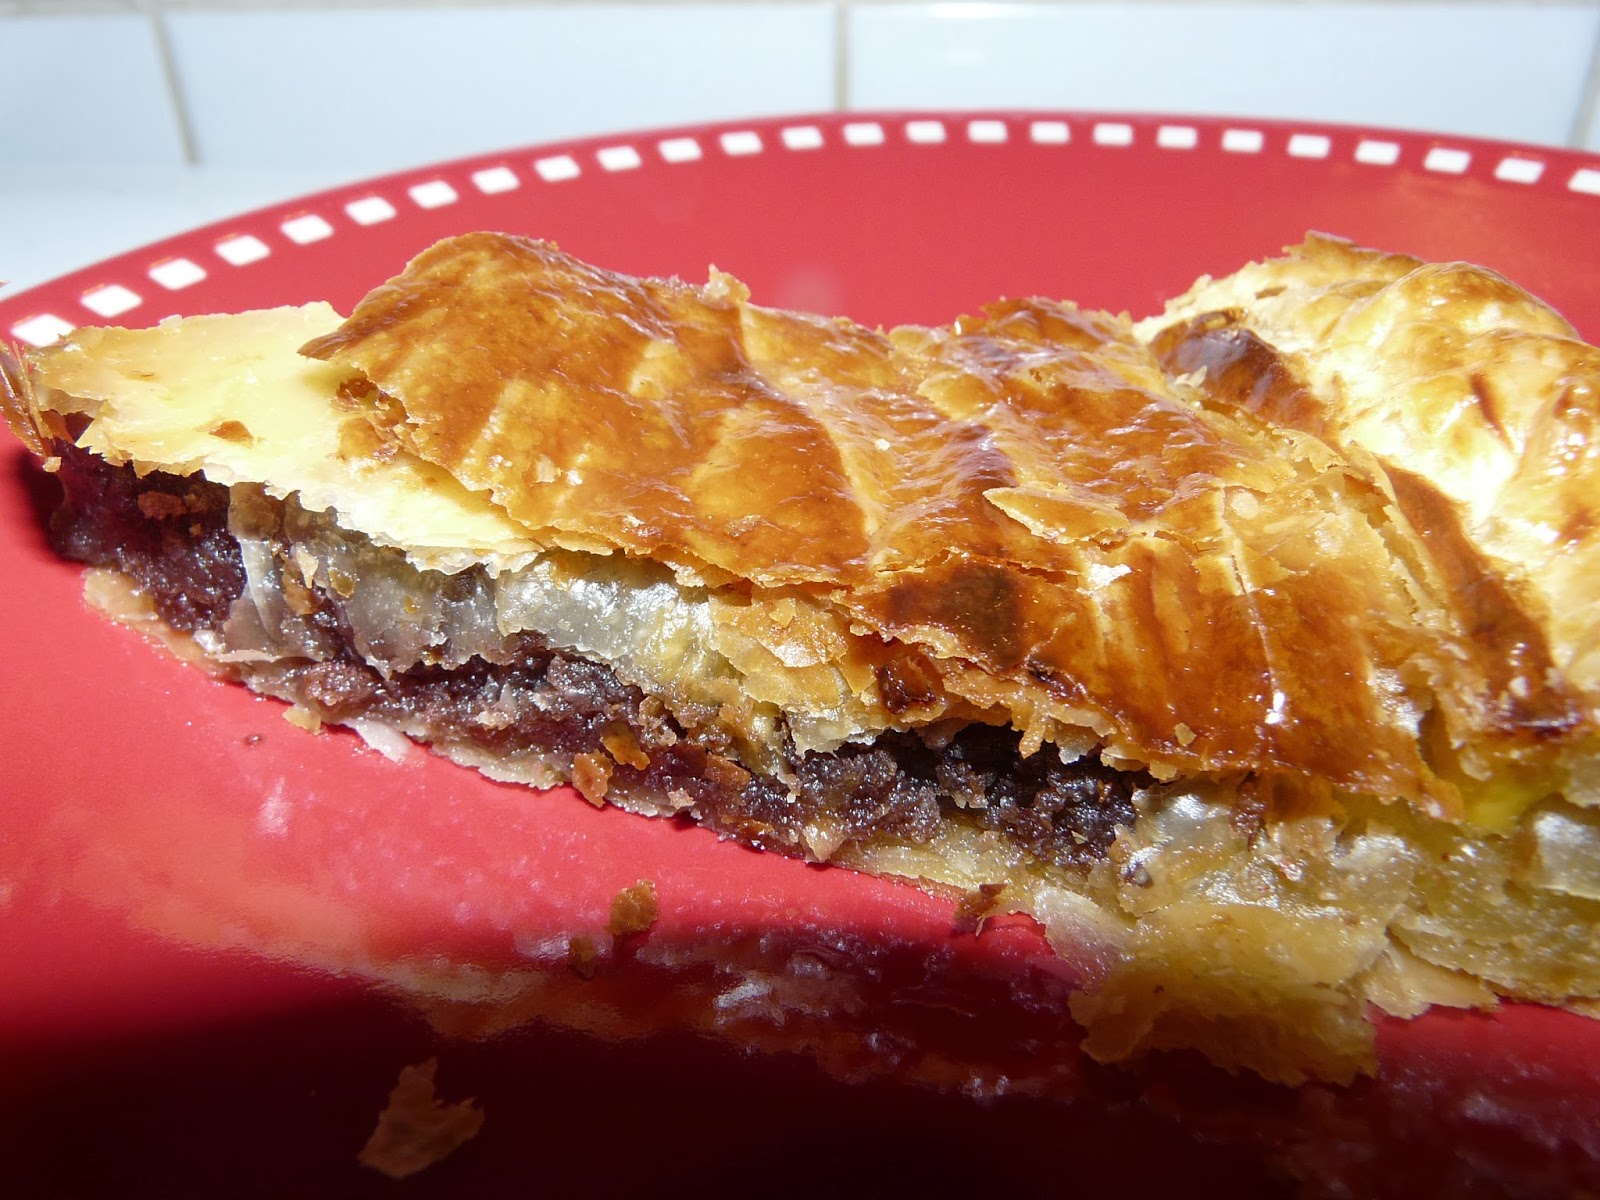 Frangipane et Chocolat: The Kings of my Homemade Galette!